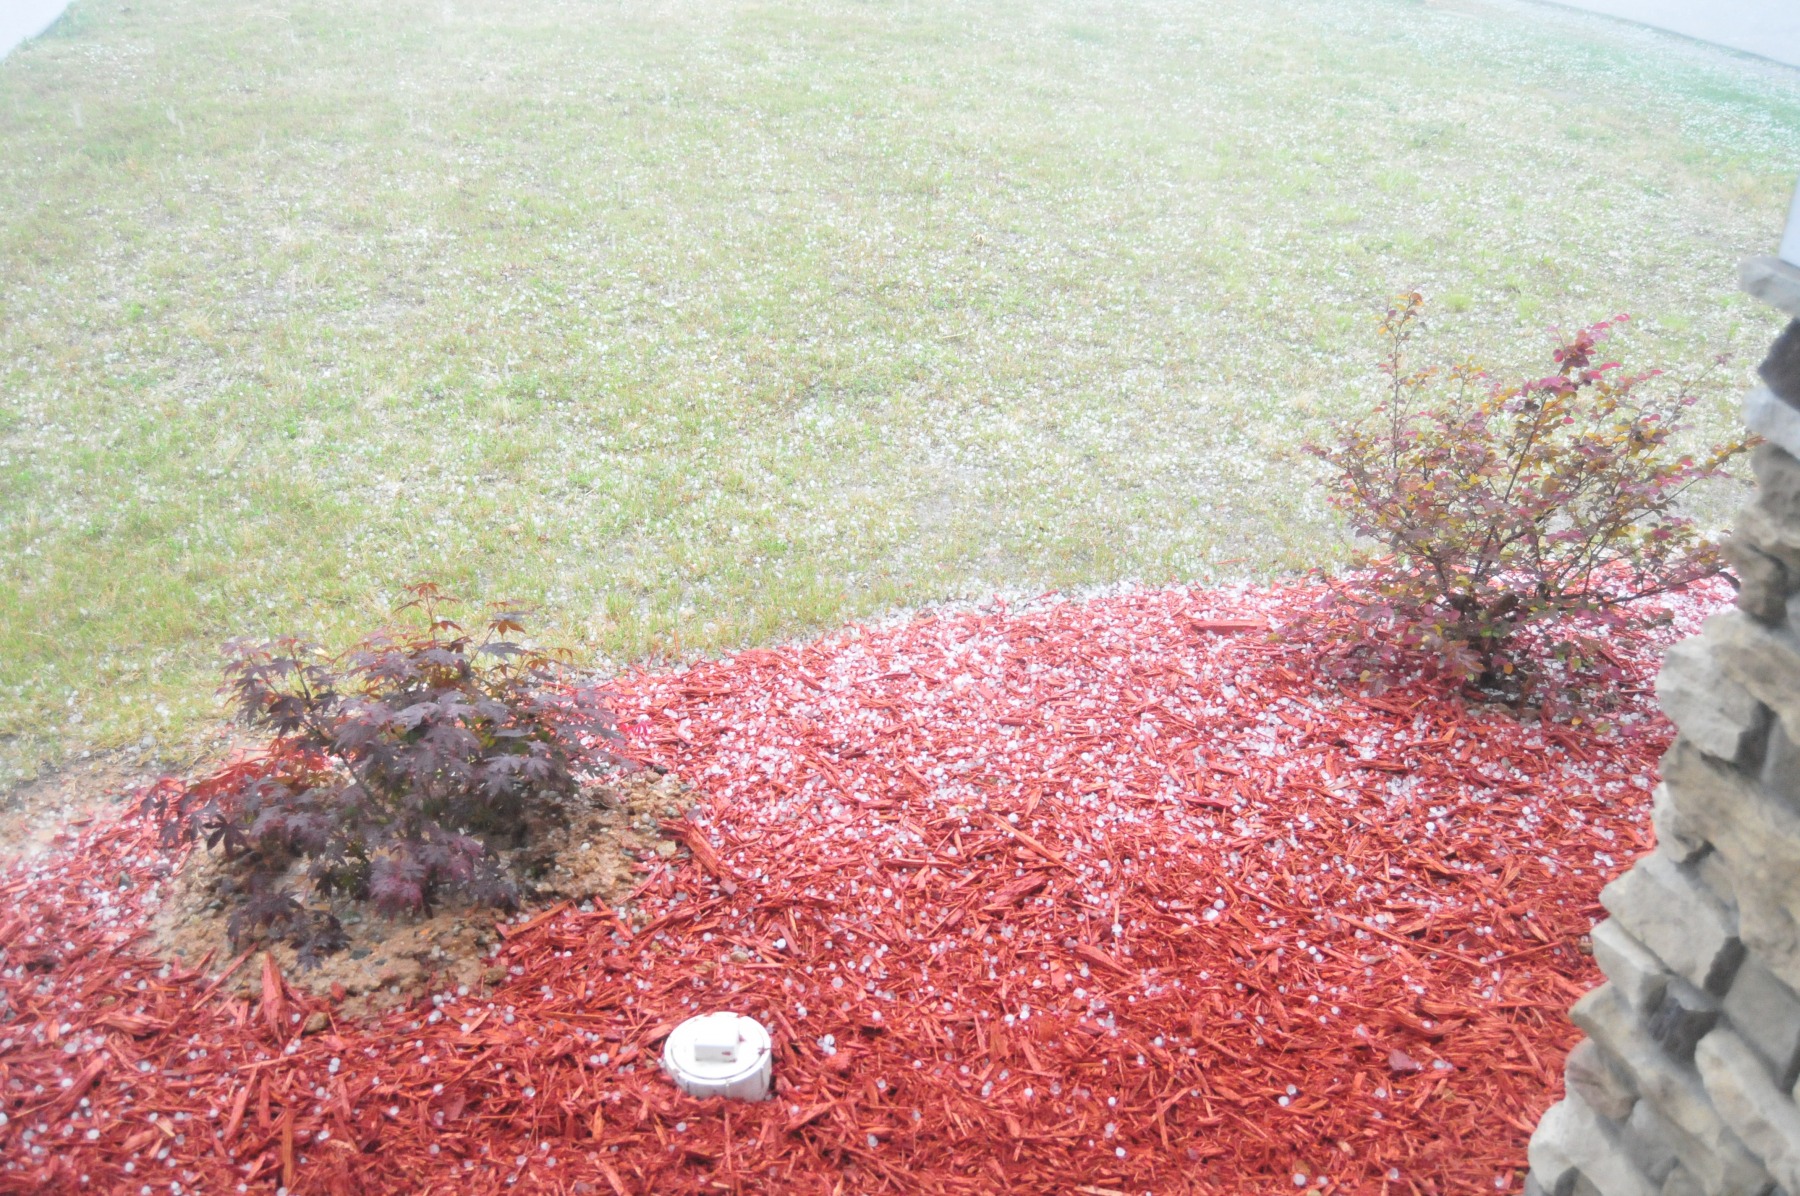 Marble-sized hail is certainly a novel experience…